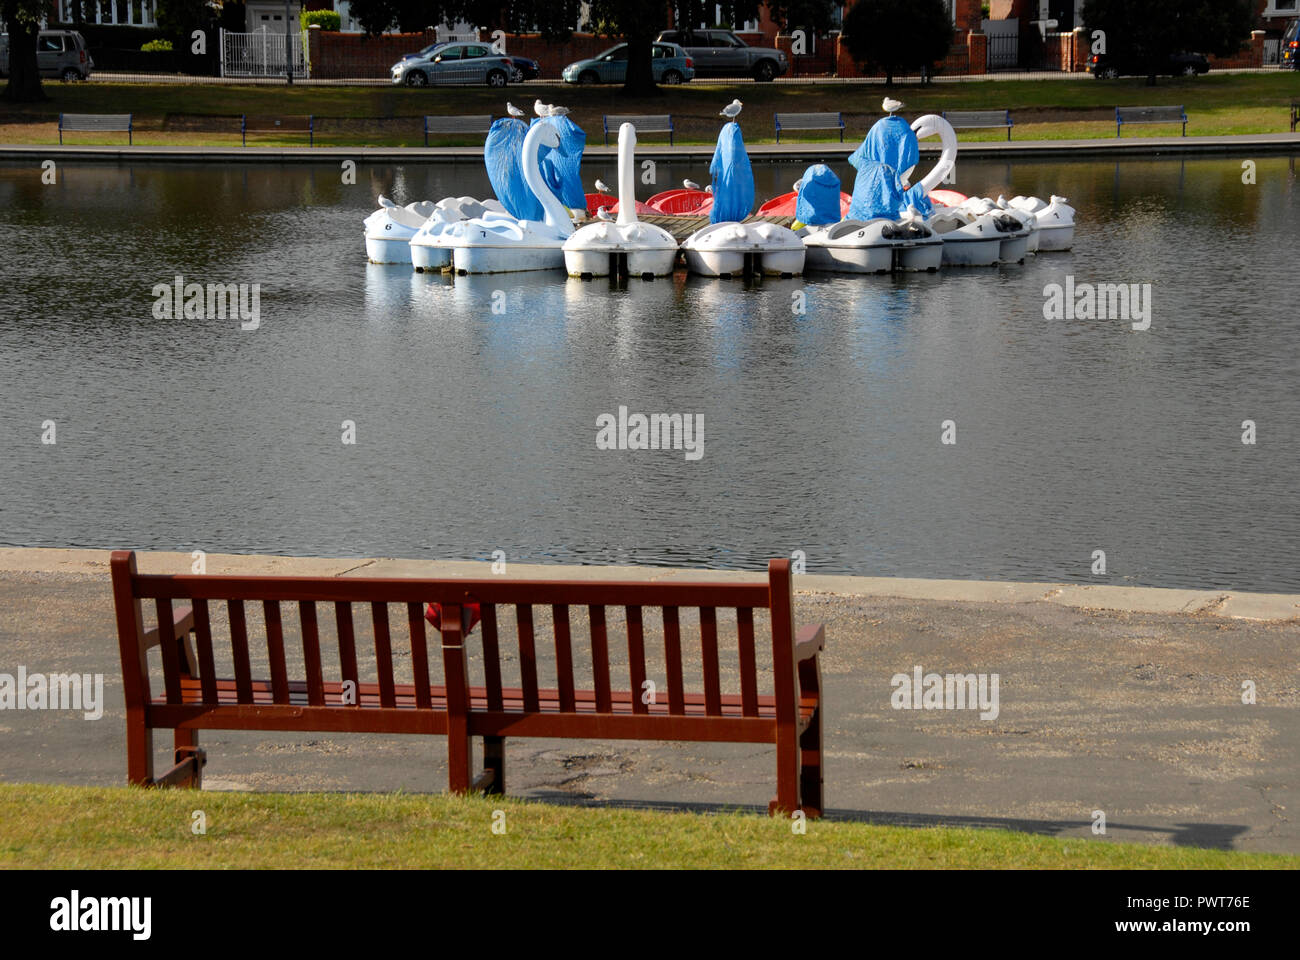 Pedalos in the shape of swans, Canoe Lake, Southsea, Porstmouth, Hampshire, England, partly covered as out of season. Empty seat in foreground. Stock Photo